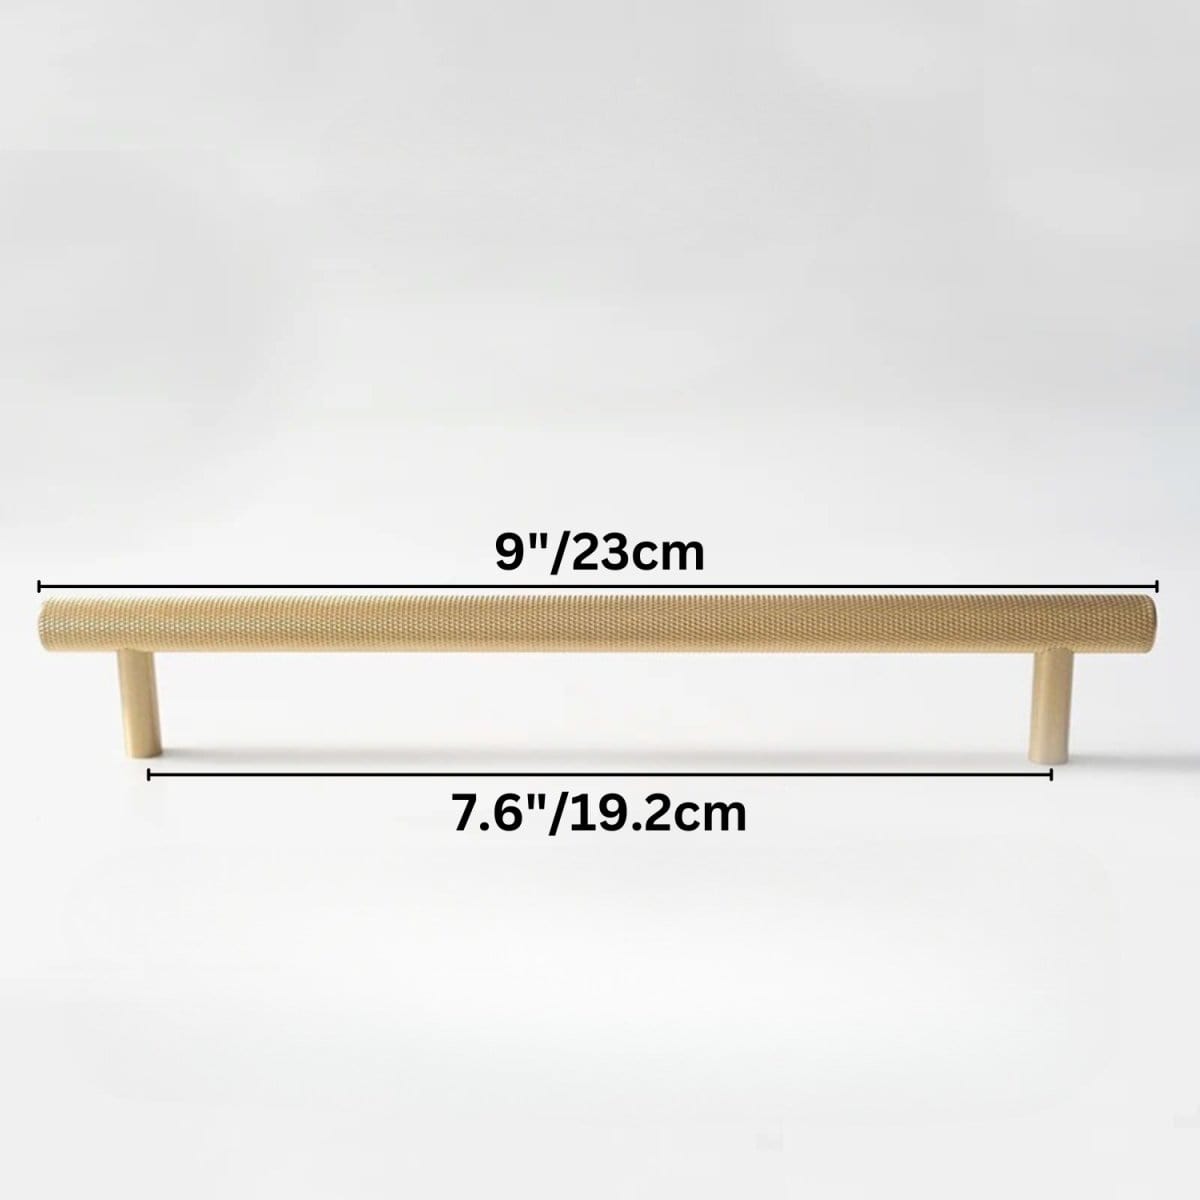 Residence Supply Hole to Hole: 7.6" / 19.2cm / Satin Brass Cucao Knob & Pull Bar